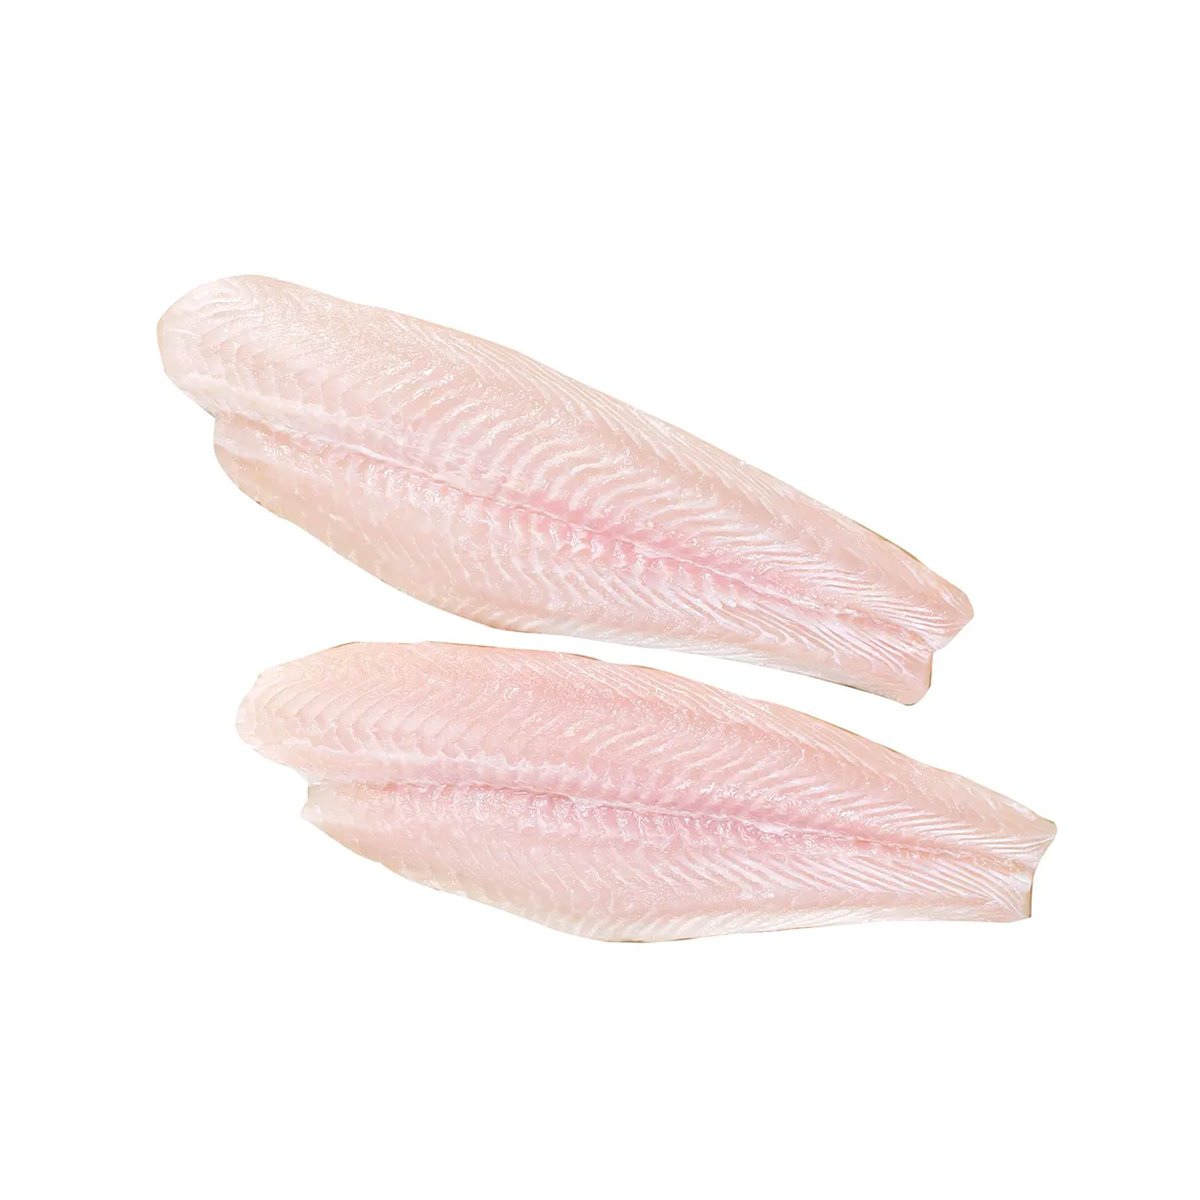 Dory Fillet 500g Approx Weight